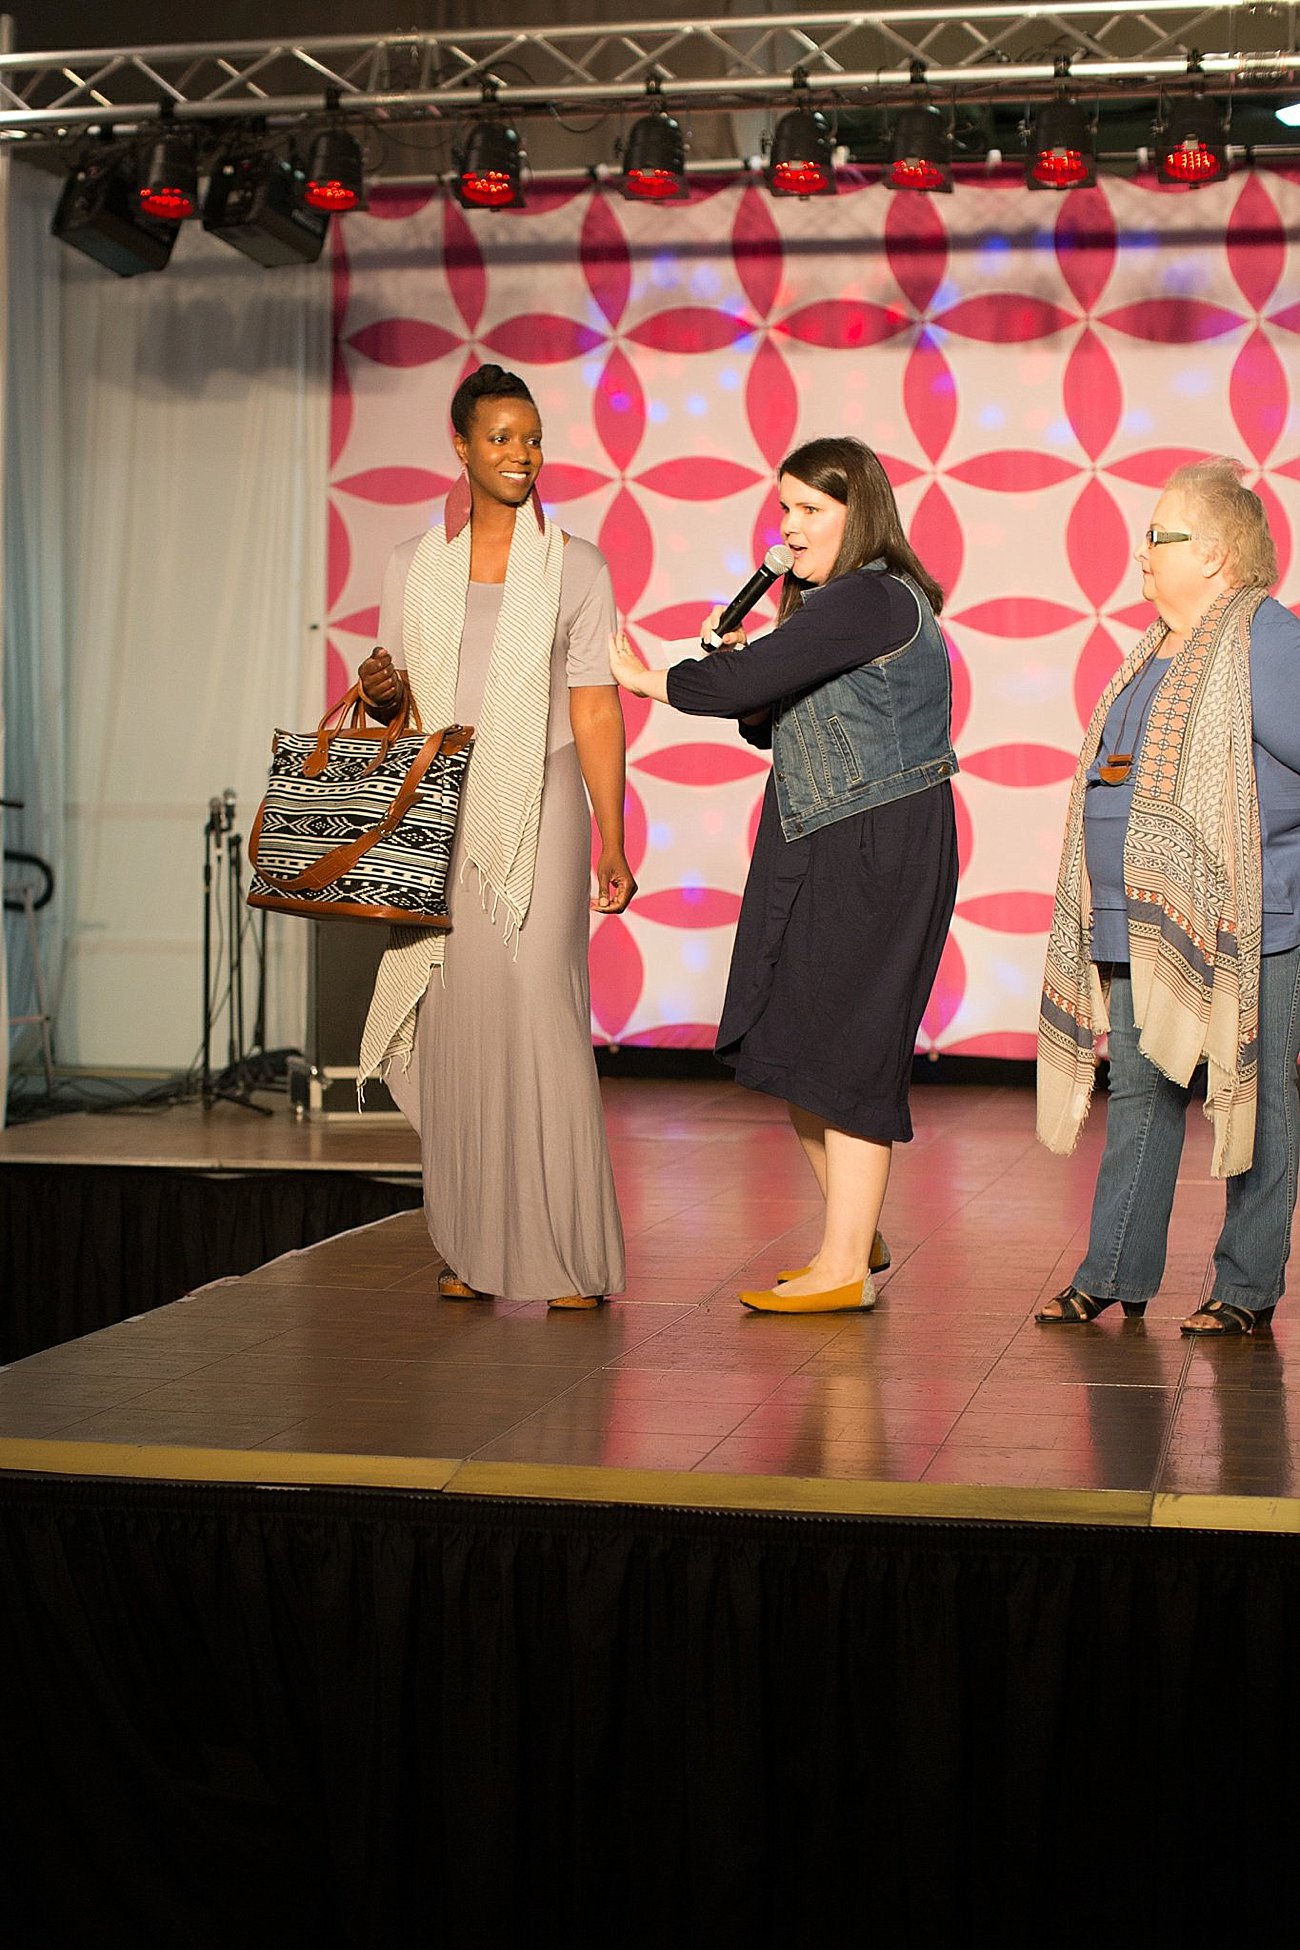 "Dressing with Purpose" Ethical Fashion Show at the Southern Women's Show in Raleigh, North Carolina 2016 | triFABB and Still Being Molly | North Carolina Fashion & Style Blogger (15)